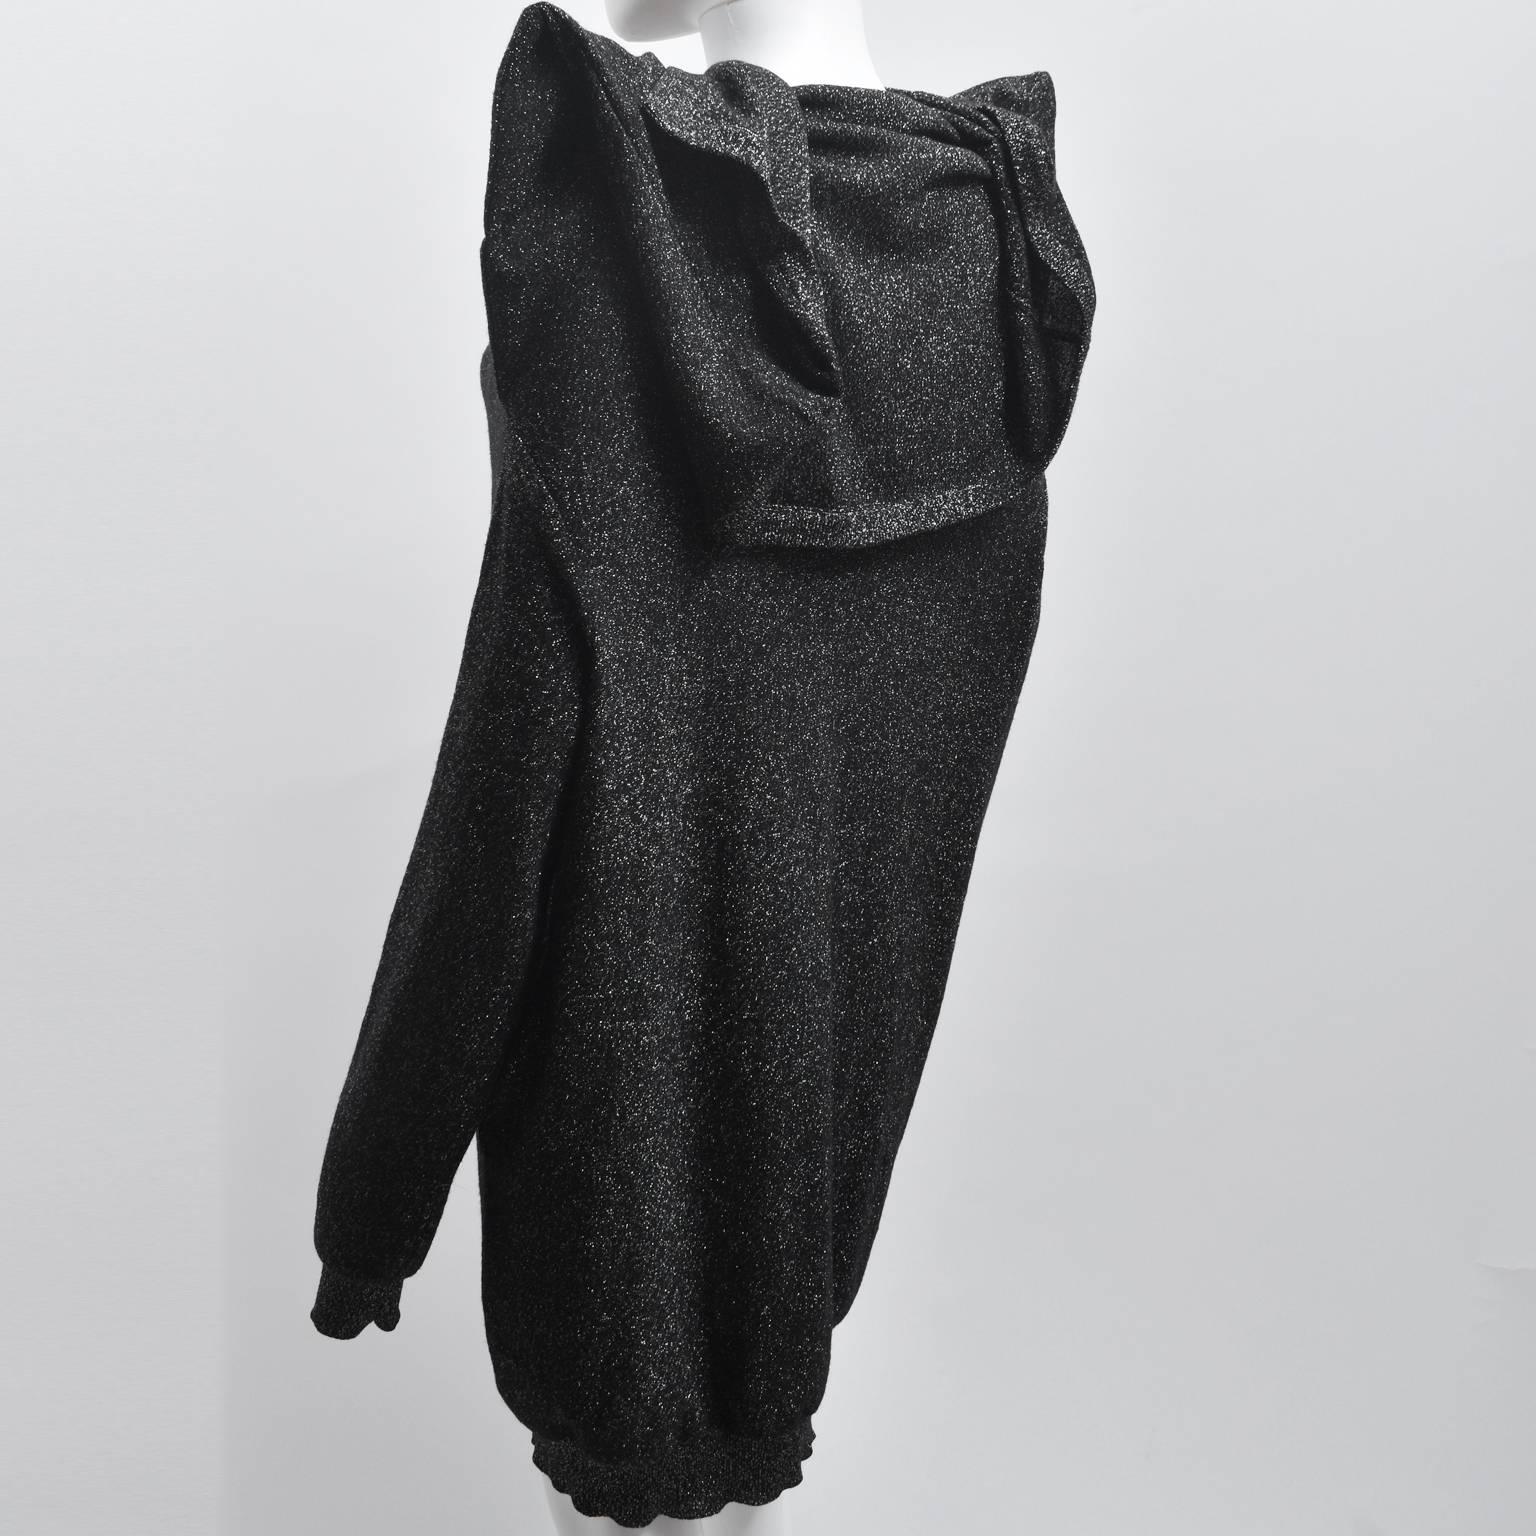 Maison Martin Margiela Black and Silver Glitter Knit with Exaggerated Shoulders For Sale 1